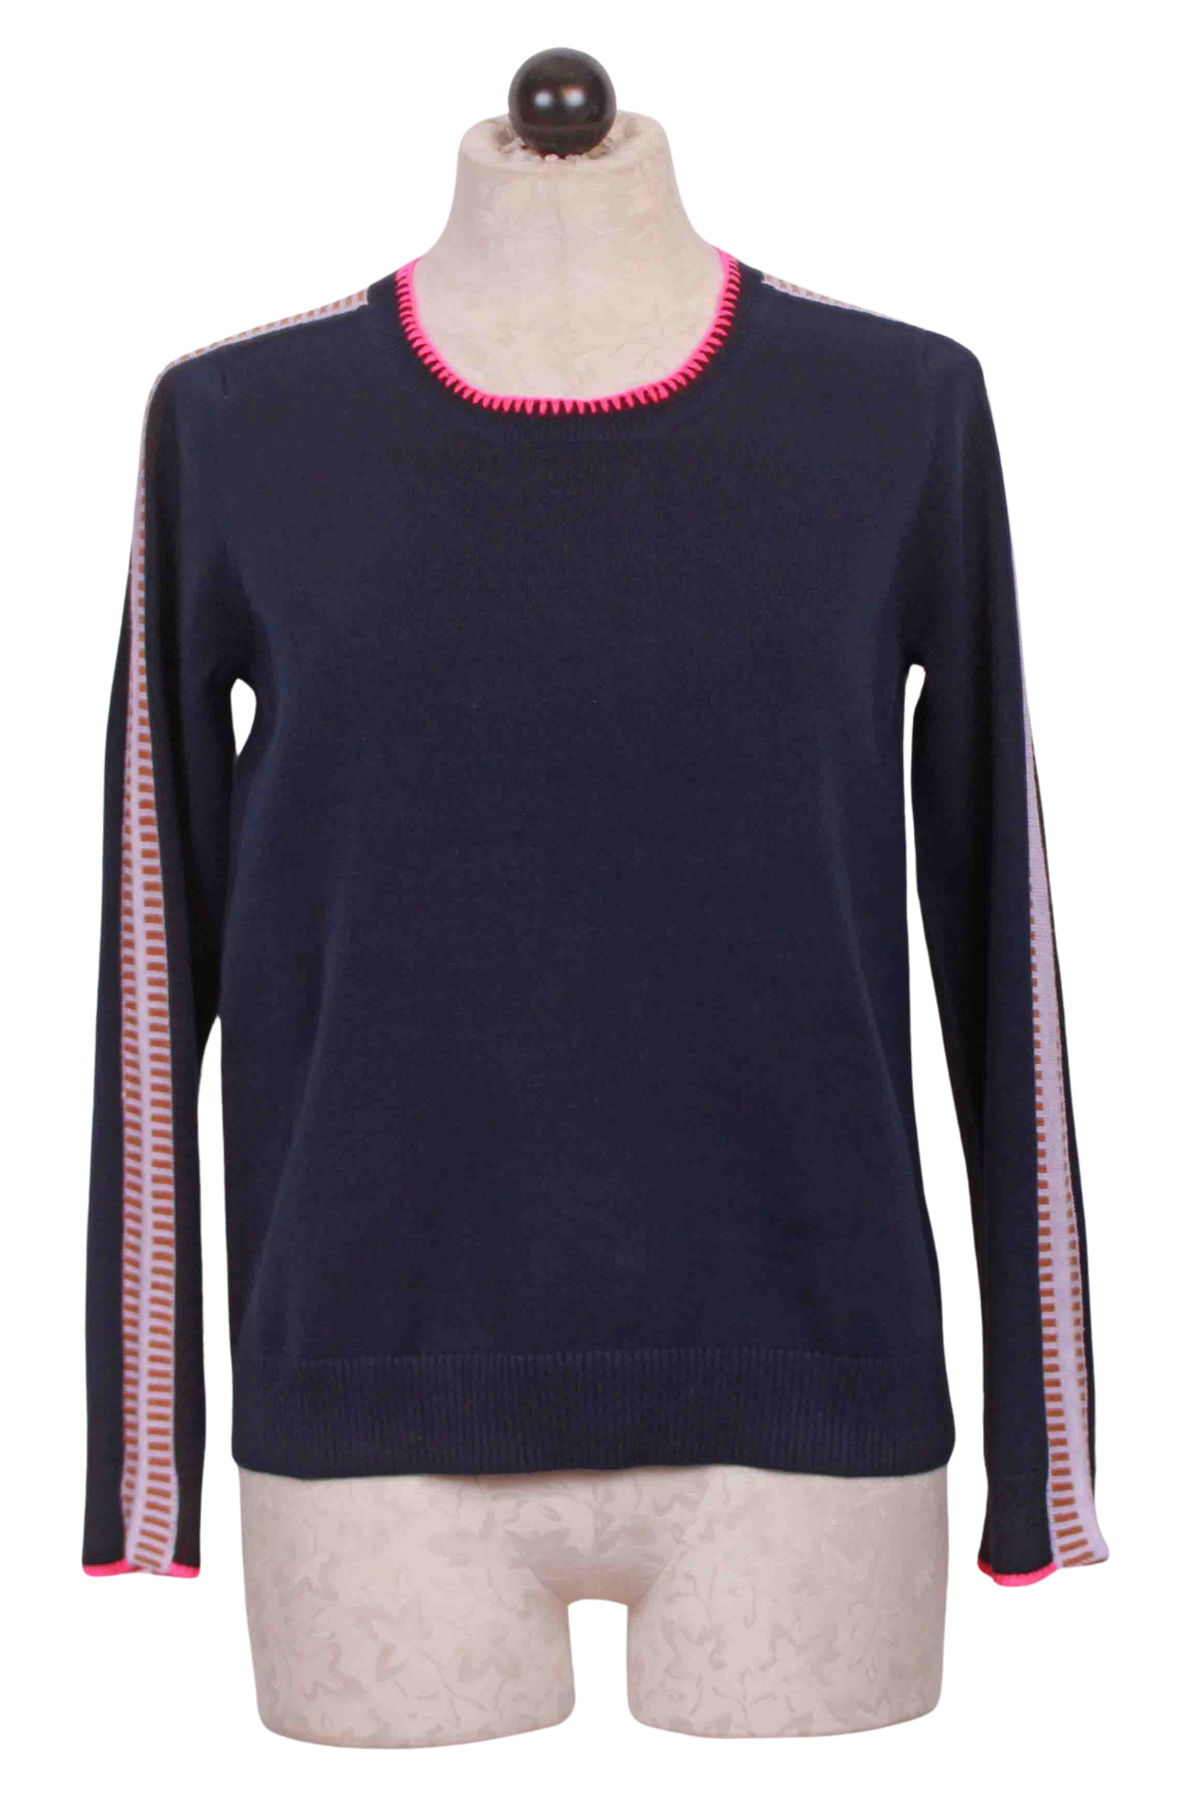 On Track Sweater by Lisa Todd in Navy/Mineral